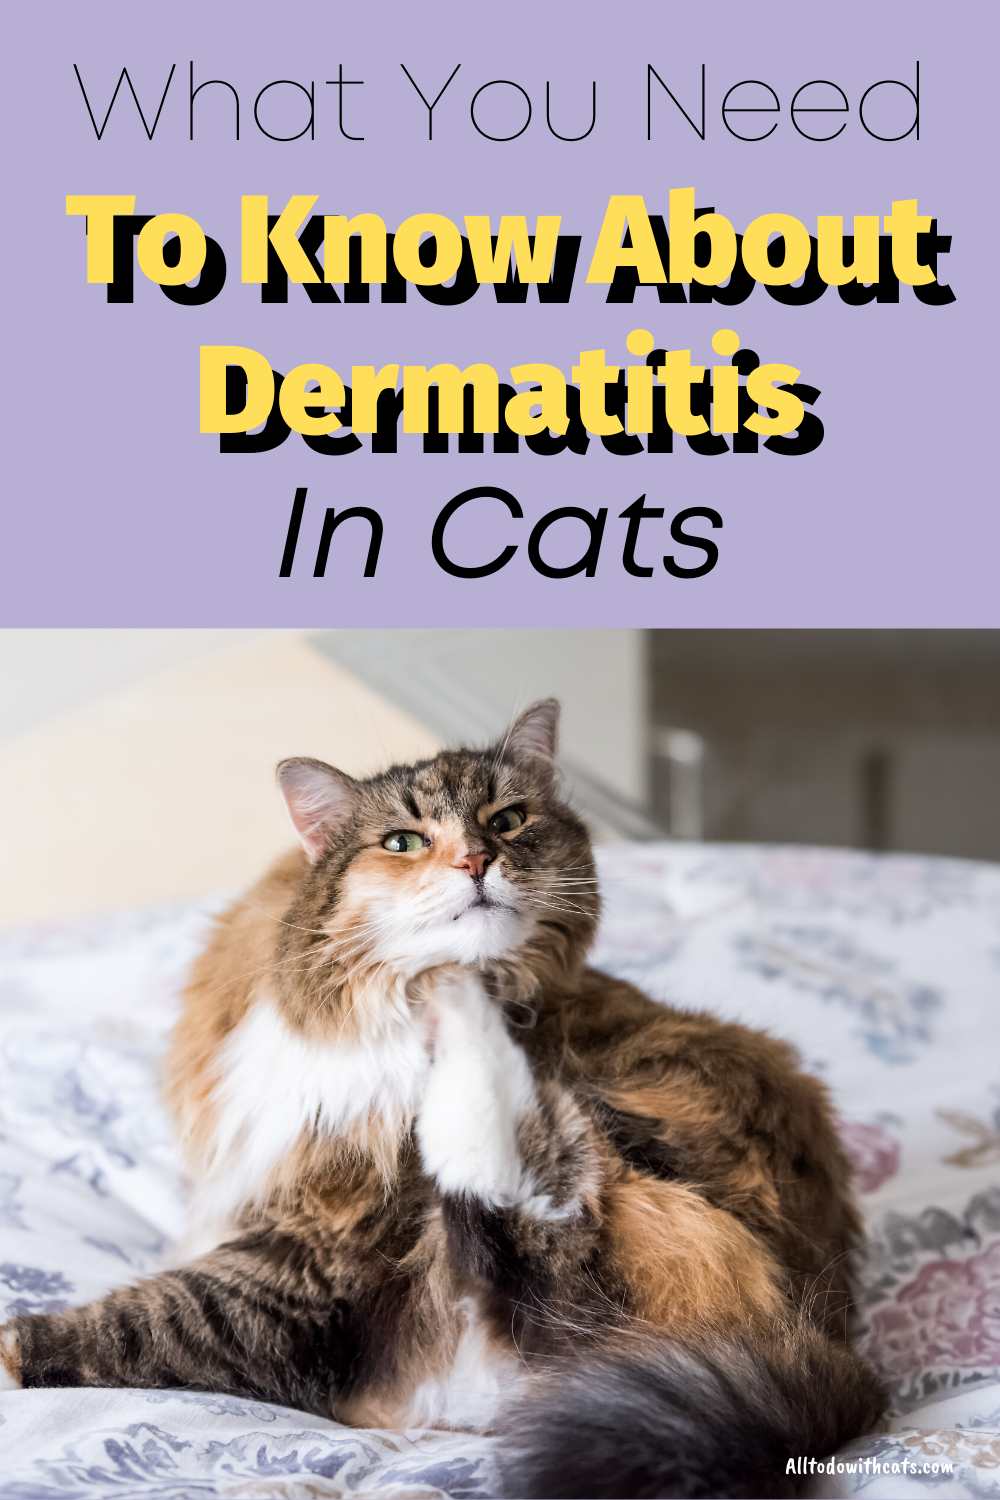 How To Treat Dermatitis In Cats: What You Need To Know